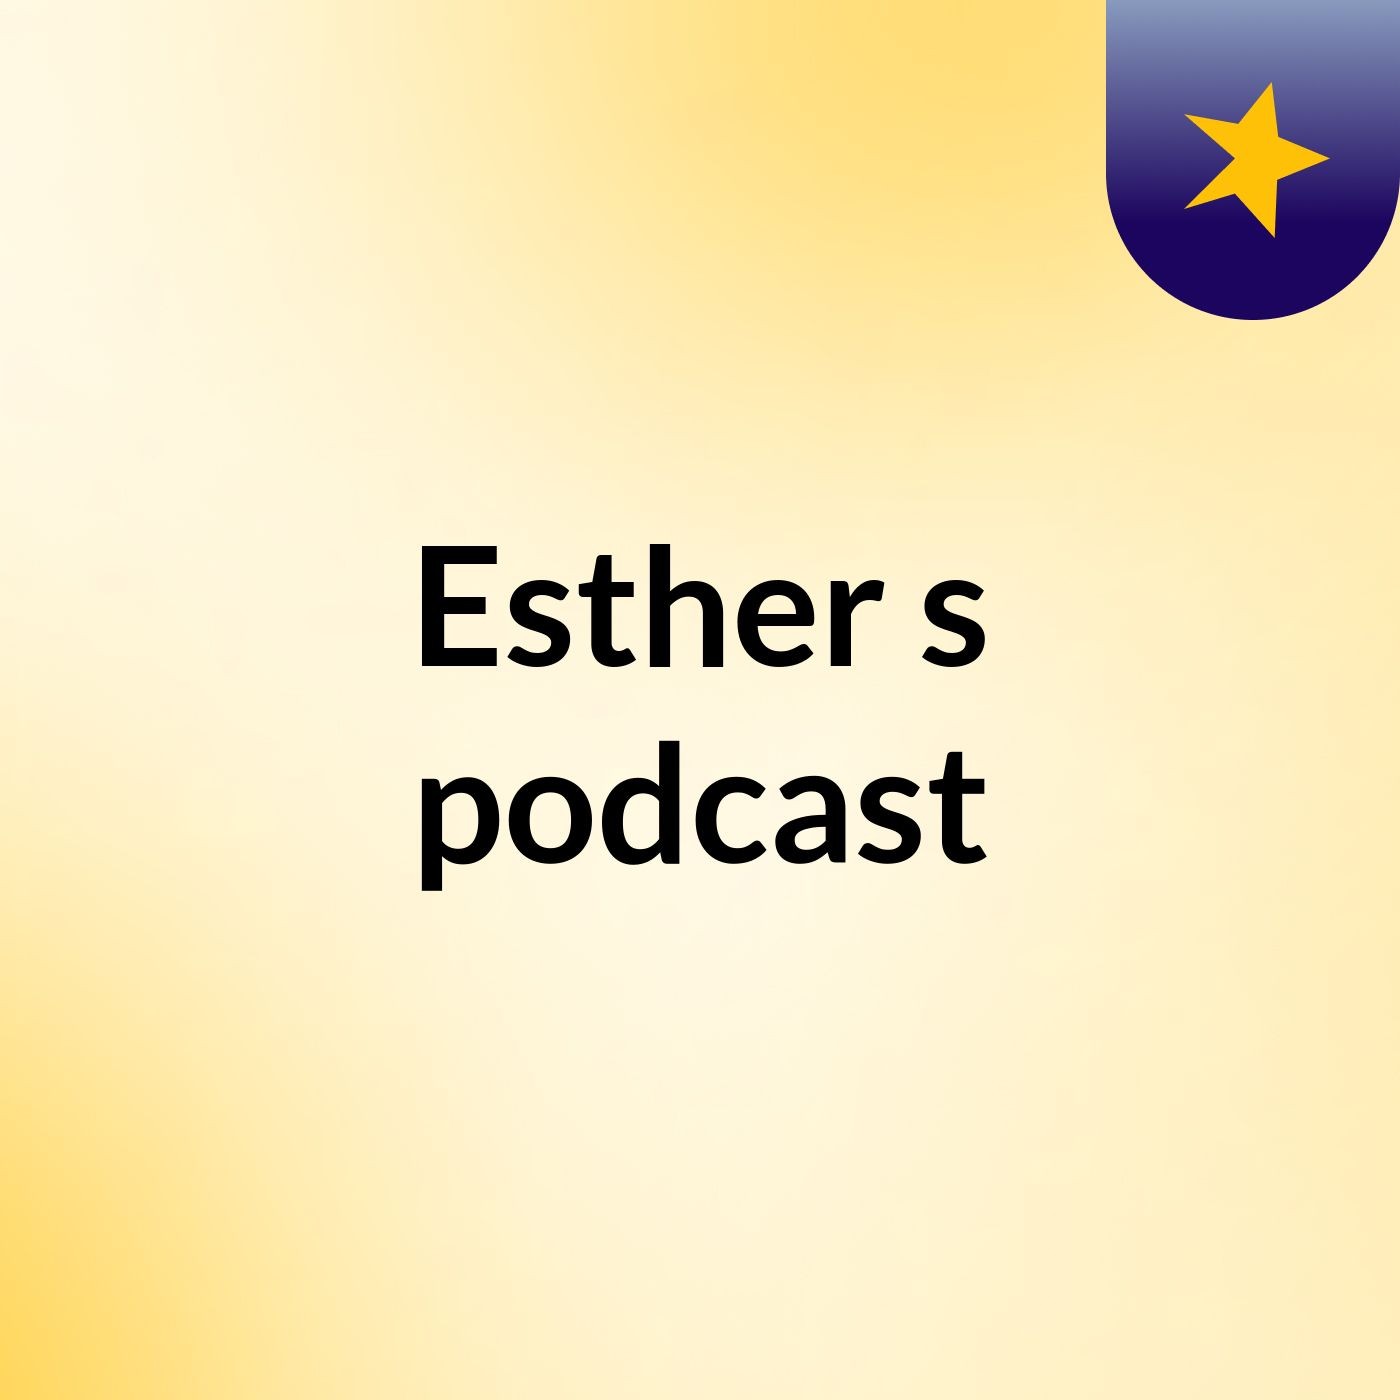 Esther's podcast